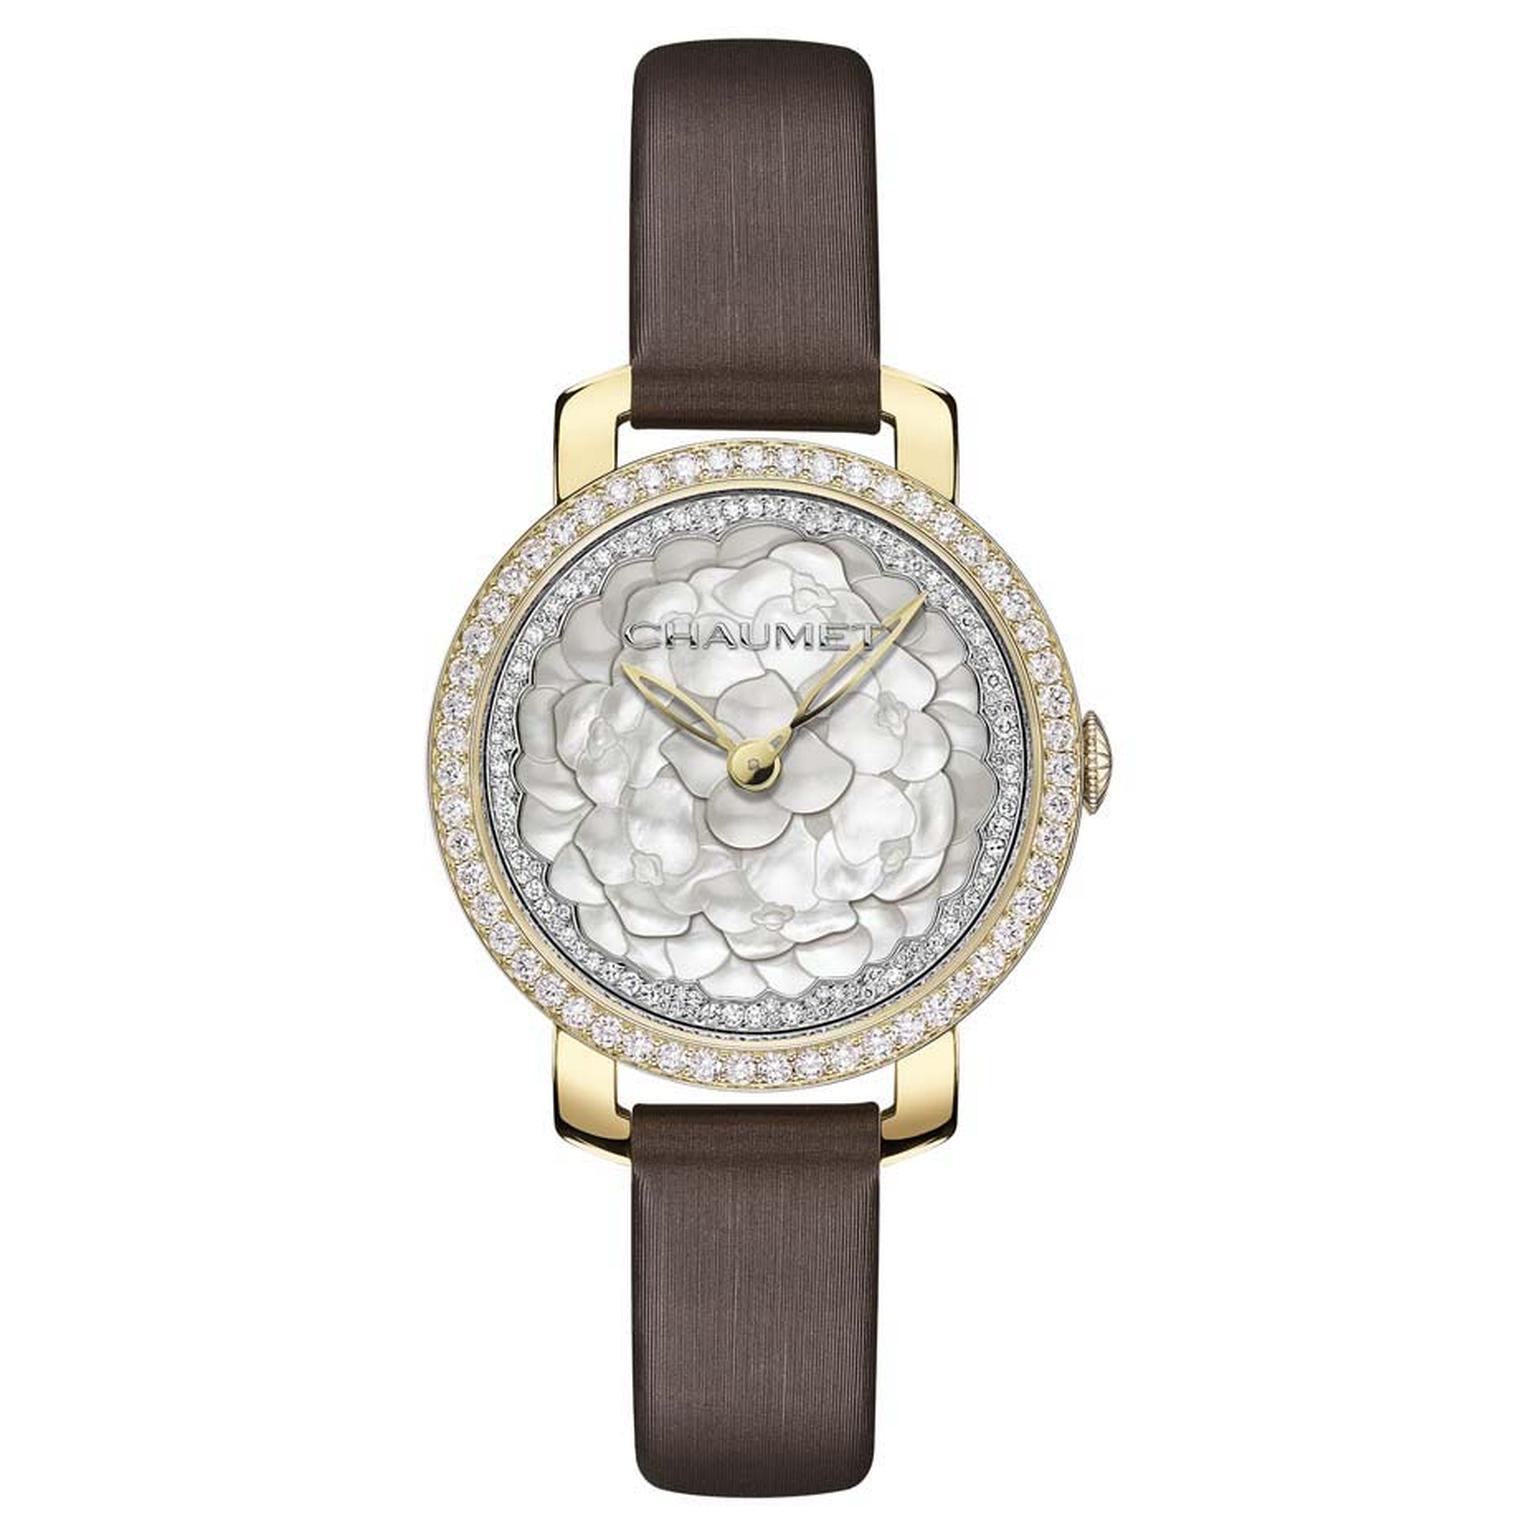 Chaumet Hortensia ladies' watch featuring a mother-of-pearl marquetry dial is presented in a 31mm yellow gold case and a brown satin strap.